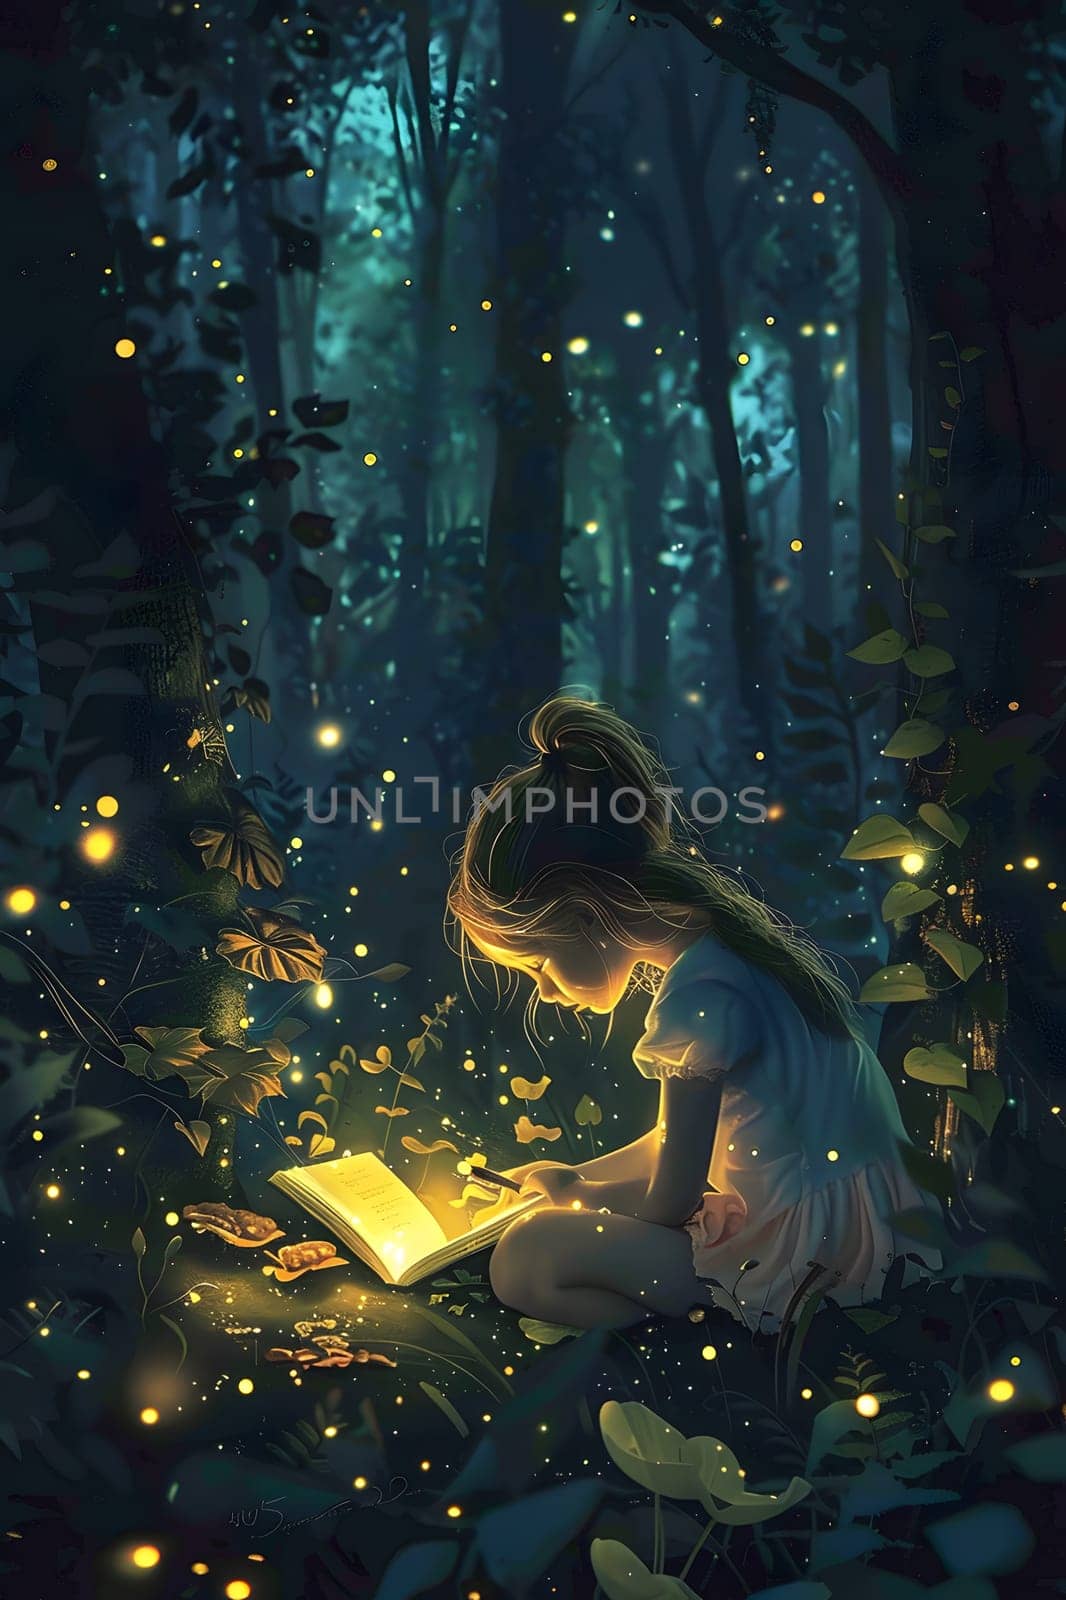 A young girl is seated in the woodland, engrossed in a book under the midnight darkness, surrounded by towering trees and the mysterious sounds of the forest